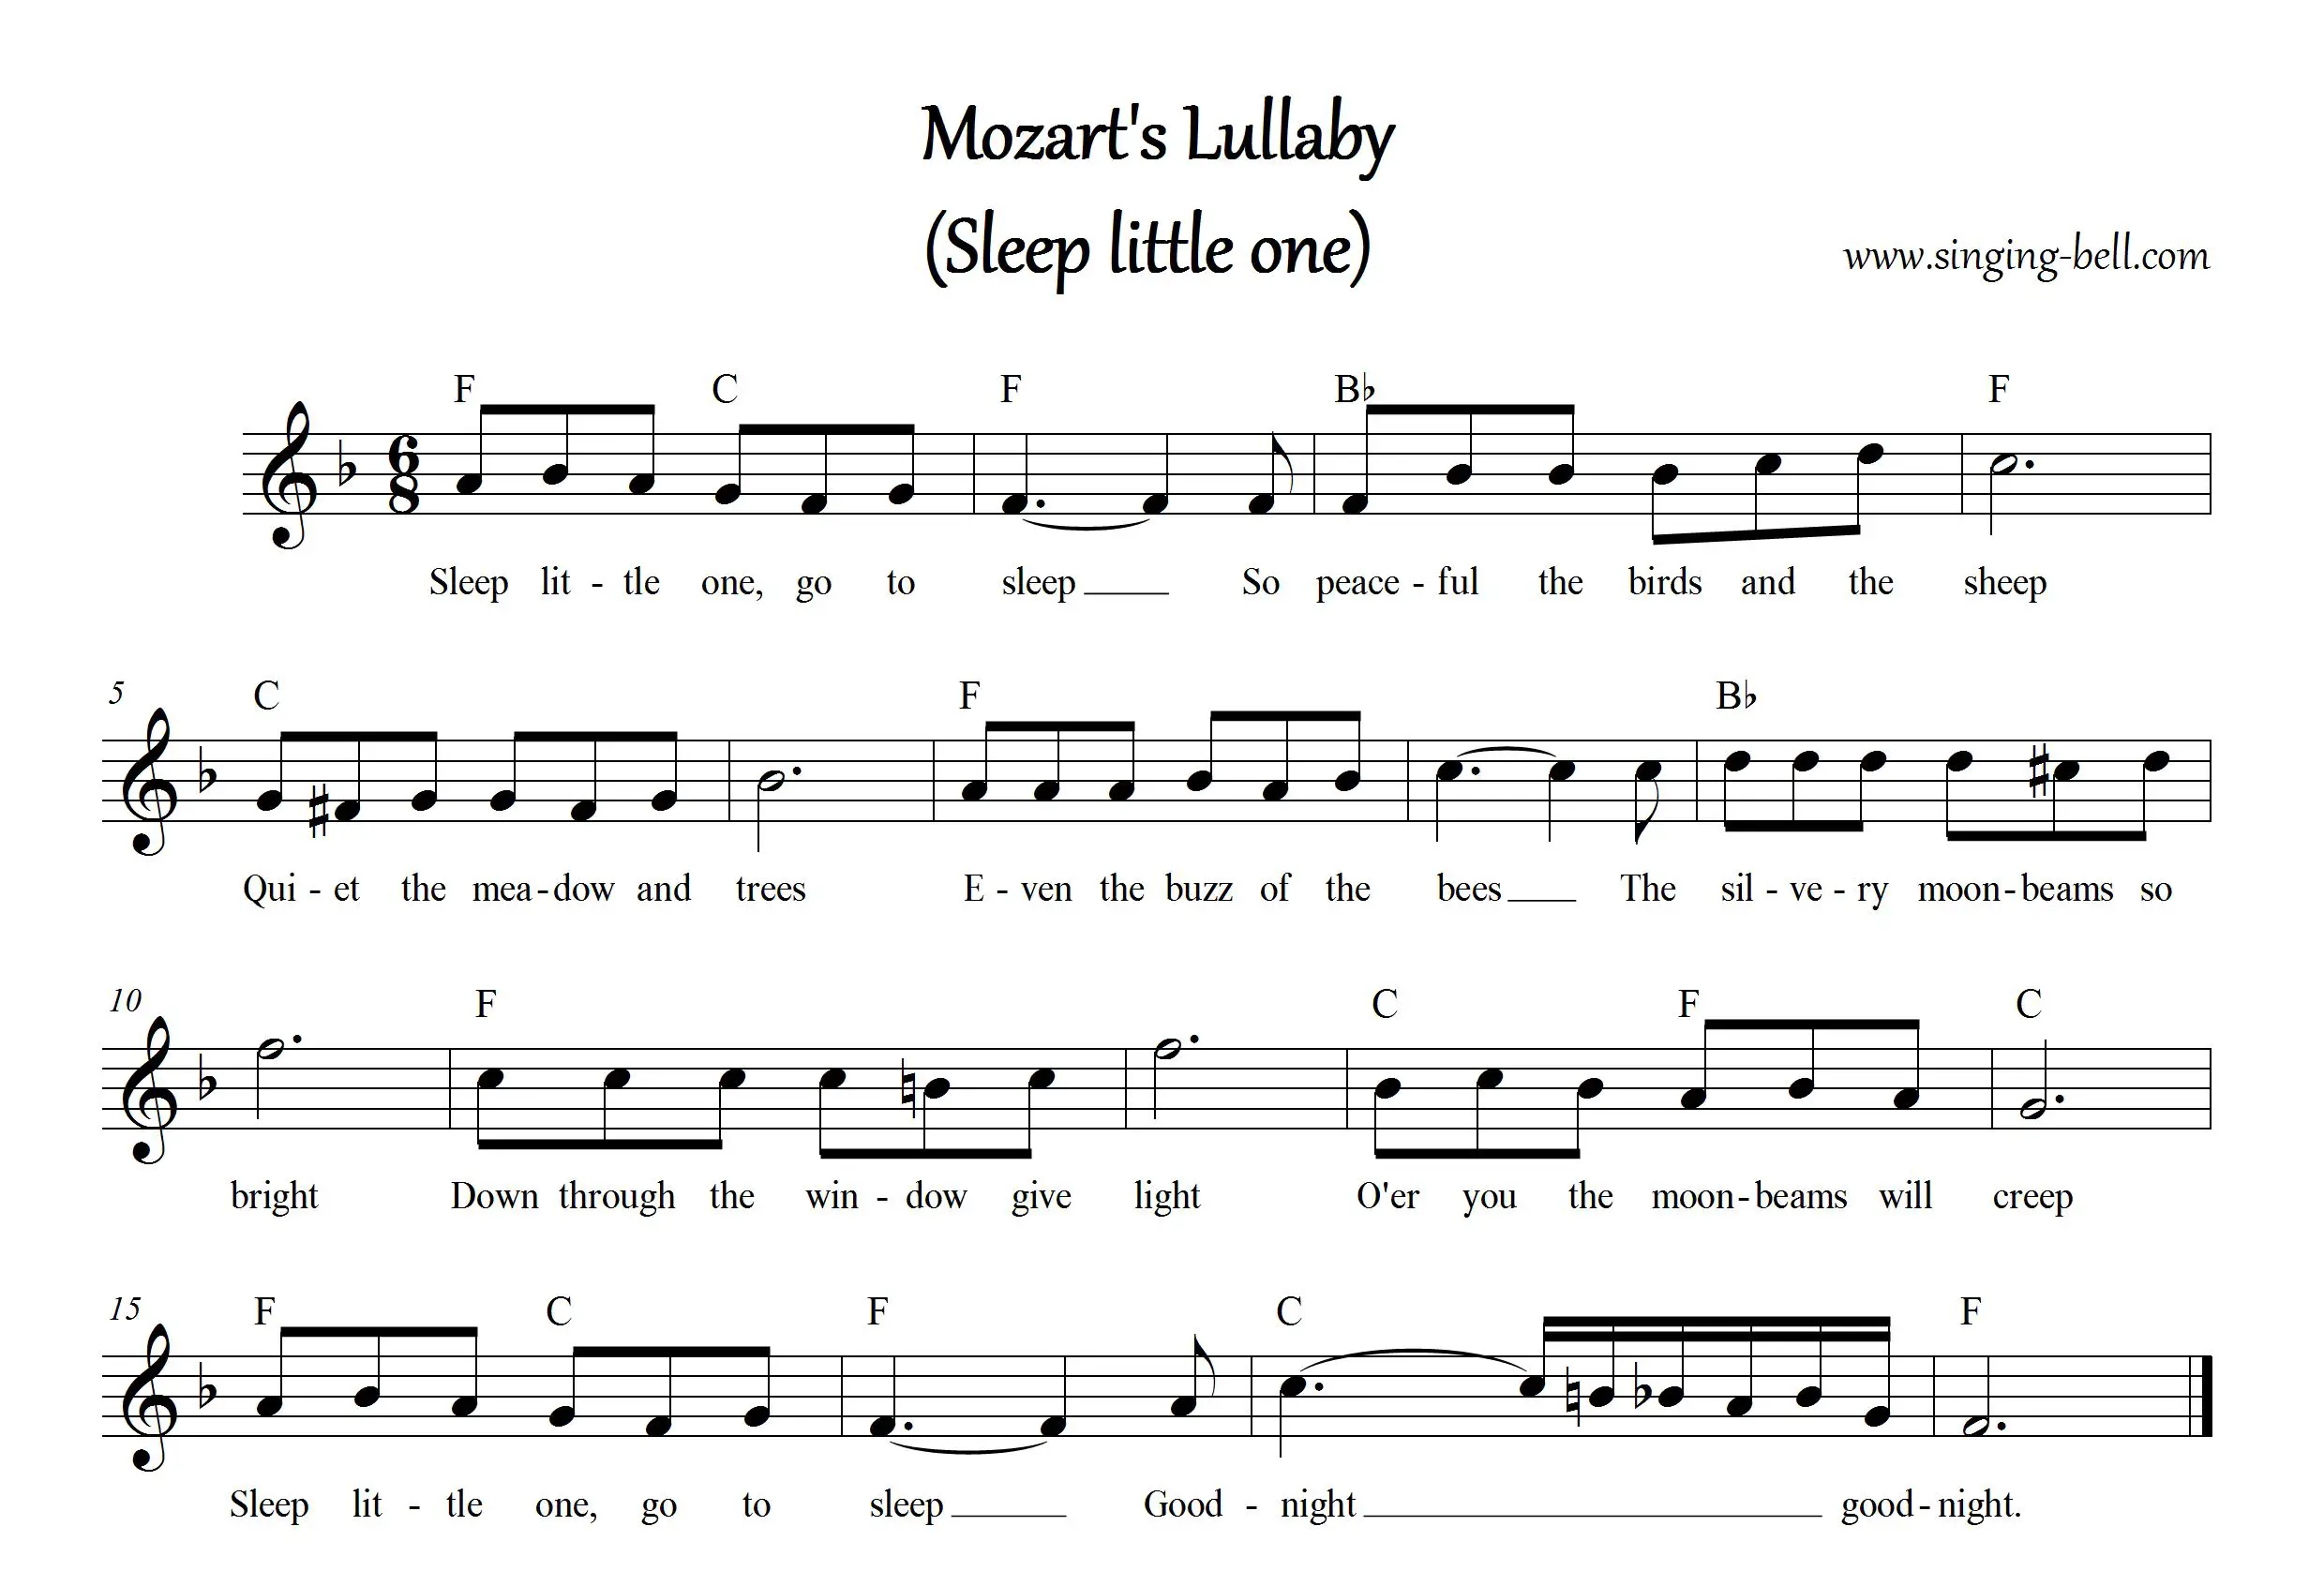 “Mozart's Lullaby (Sleep, little one)” Music Score with chords in F